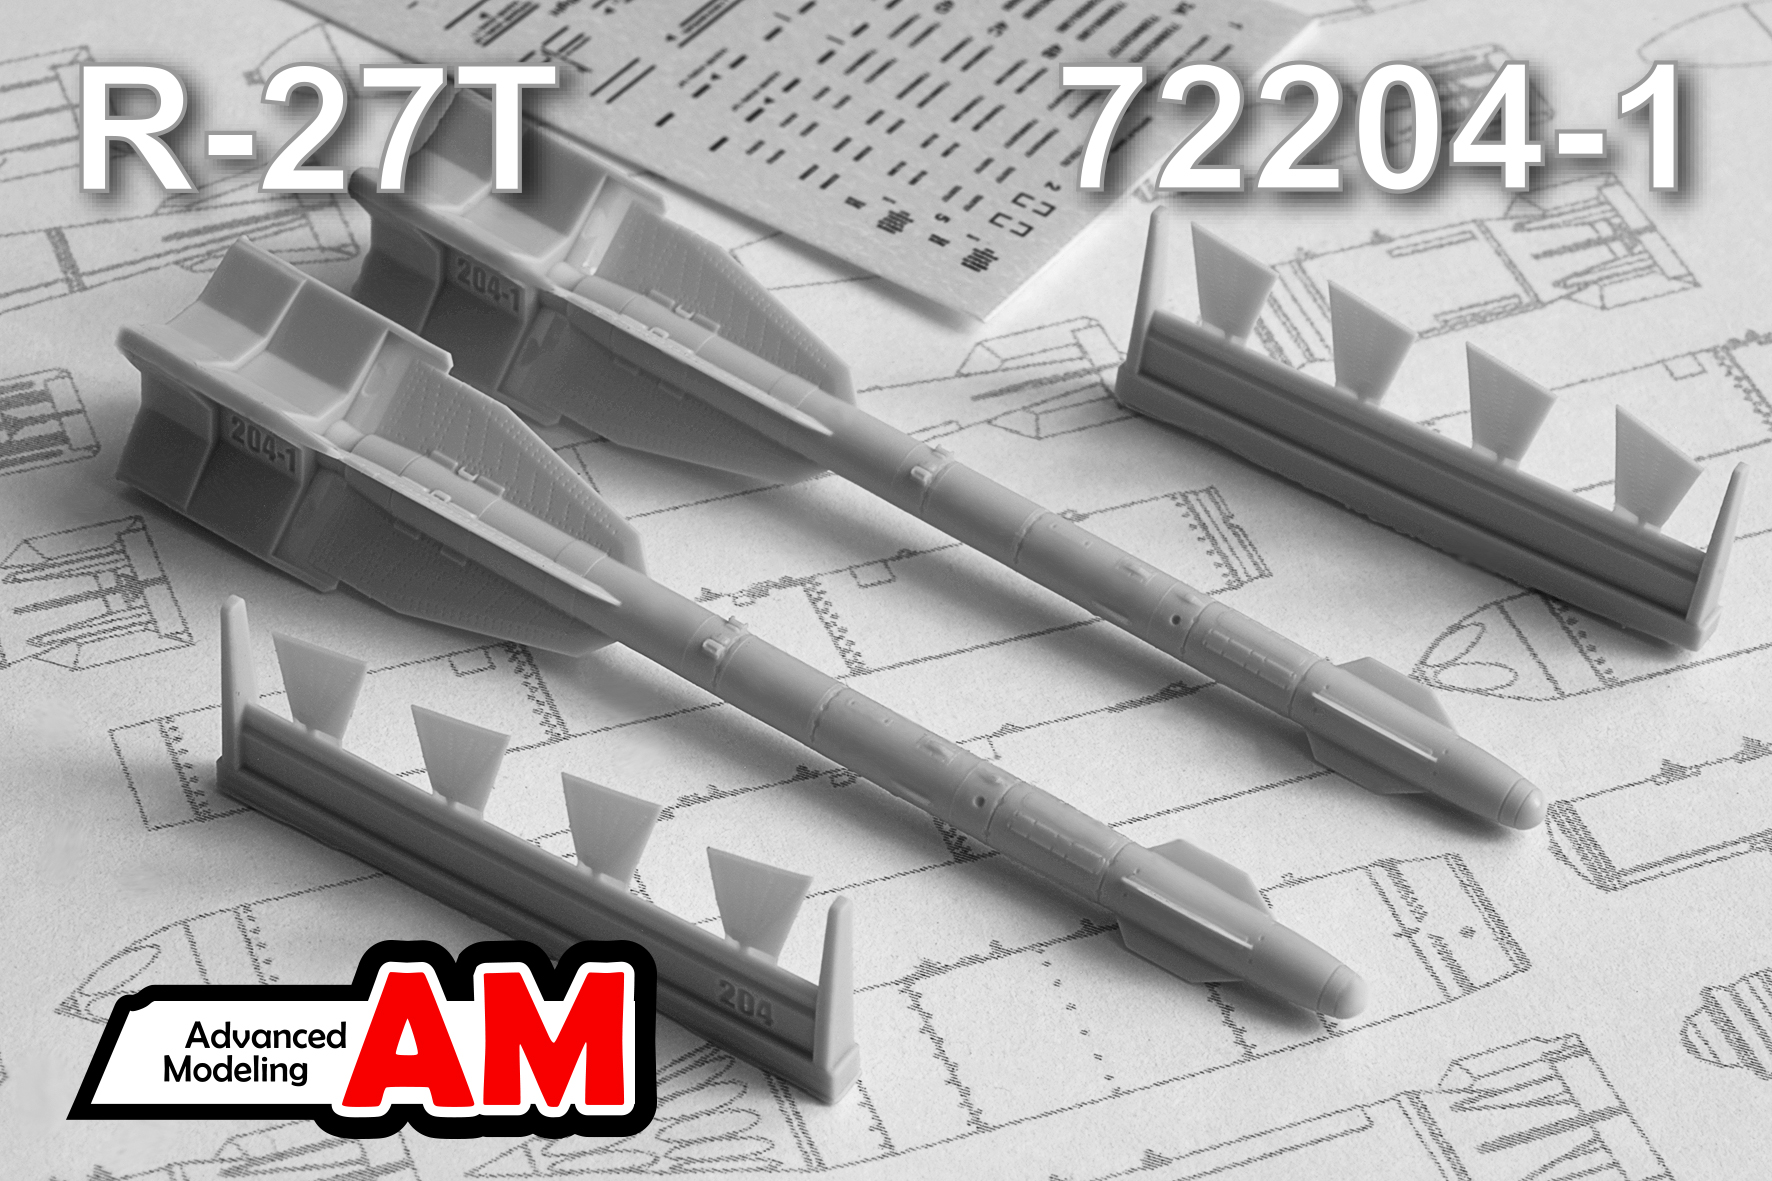 Additions (3D resin printing) 1/72 R-27T Air to Air missile (Advanced Modeling) 